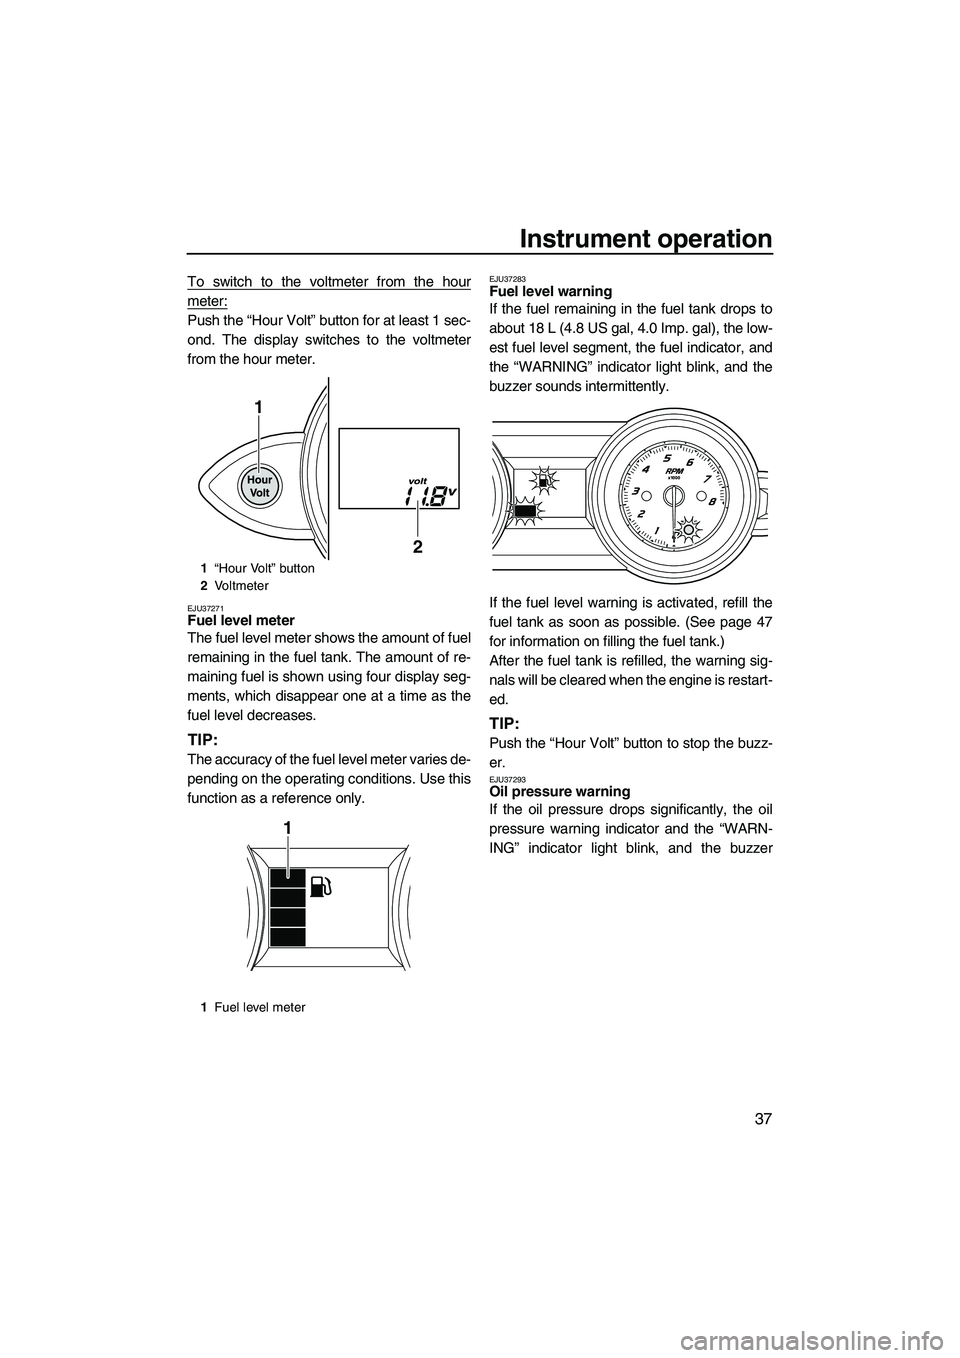 YAMAHA FZR 2013  Owners Manual Instrument operation
37
To switch to the voltmeter from the hour
meter:
Push the “Hour Volt” button for at least 1 sec-
ond. The display switches to the voltmeter
from the hour meter.
EJU37271Fuel